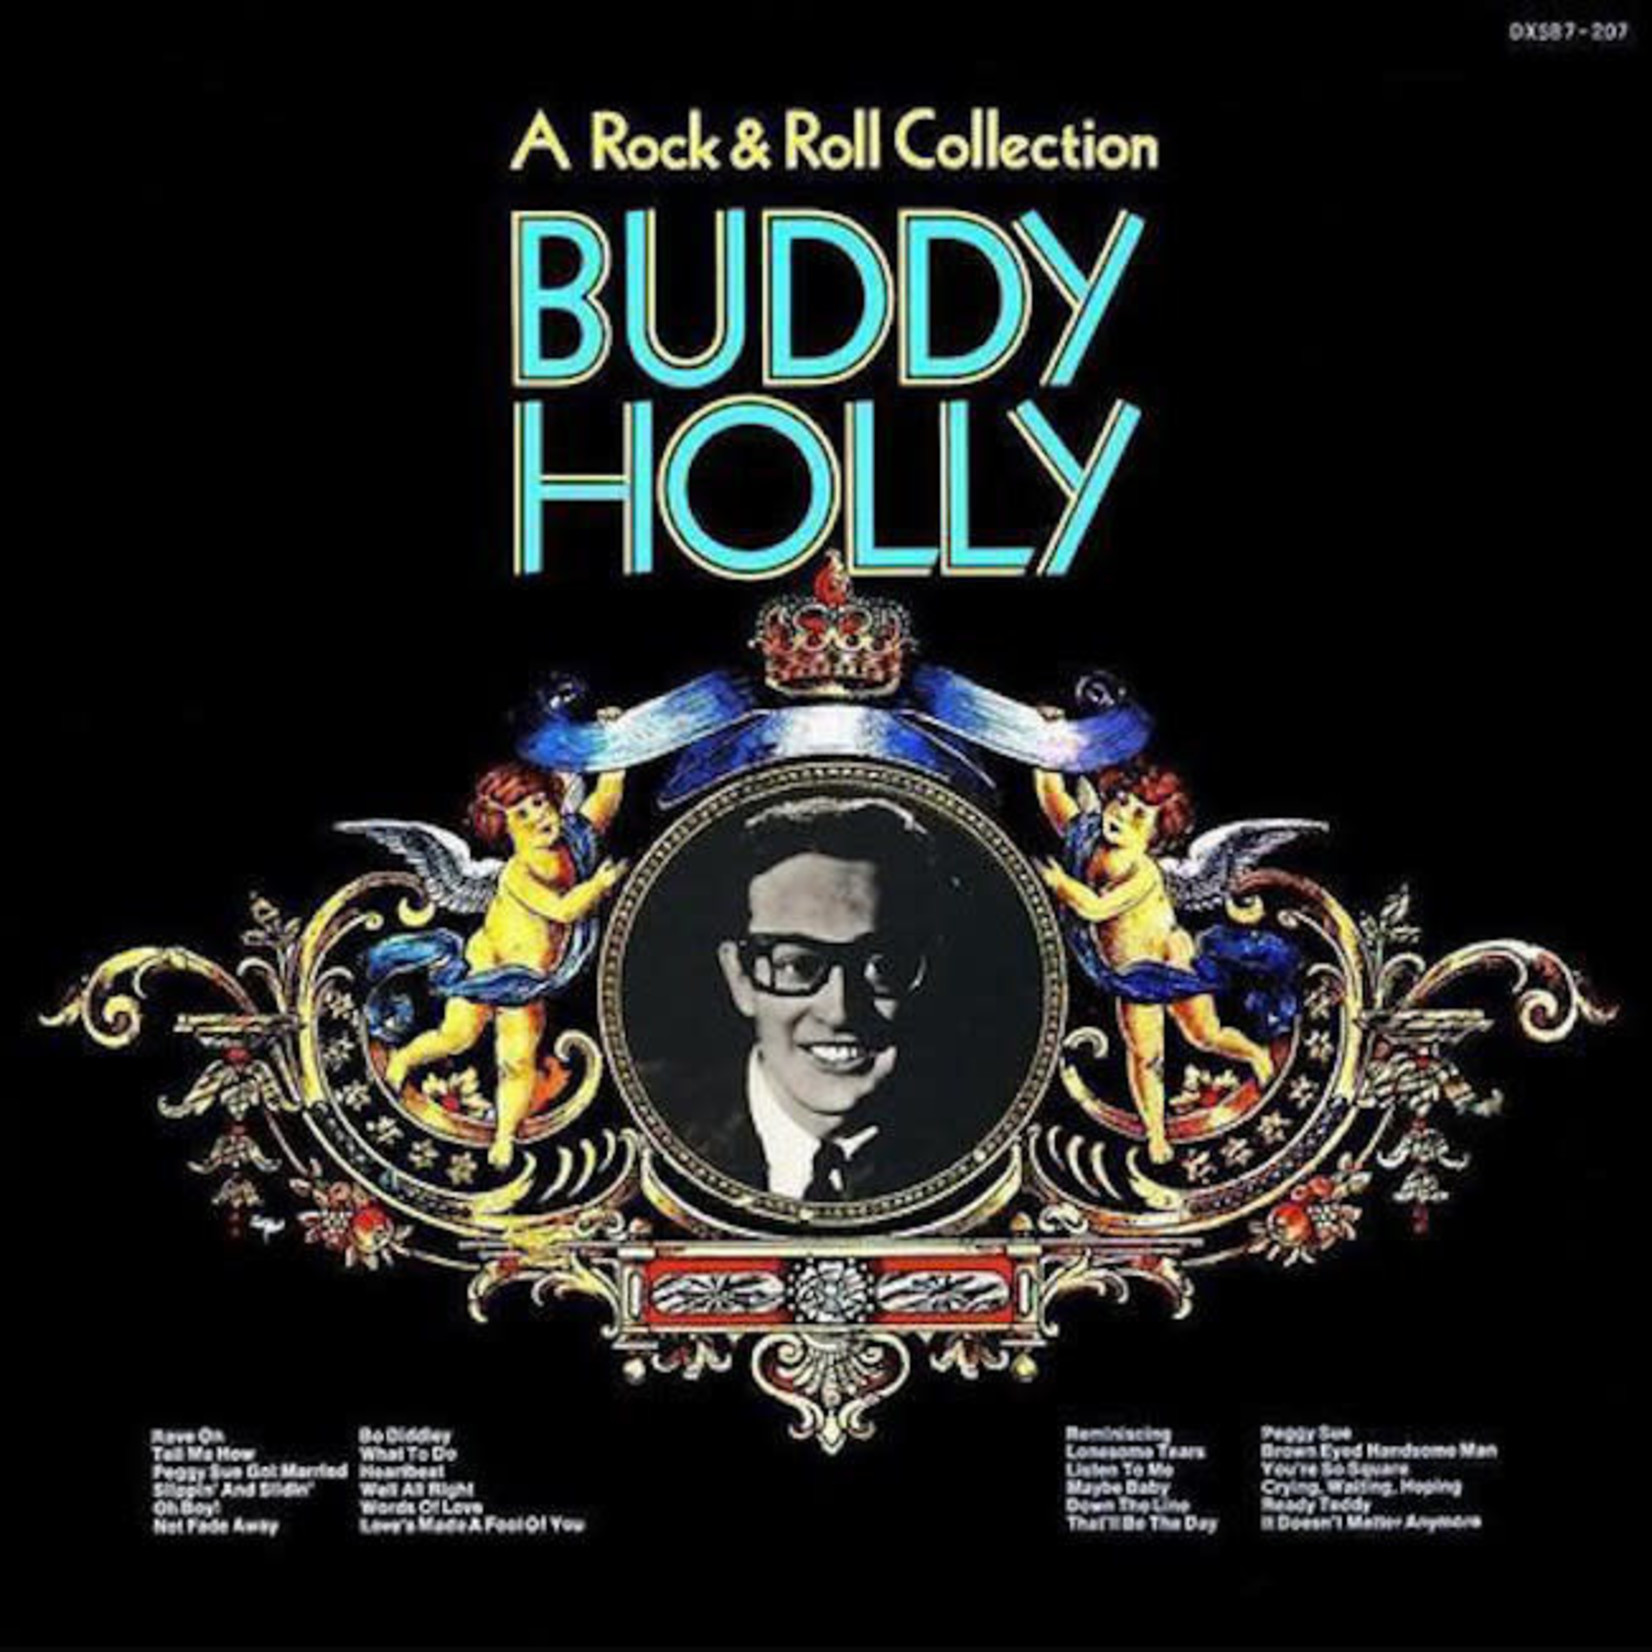 [Vintage] Buddy Holly - A Rock & Roll Collection